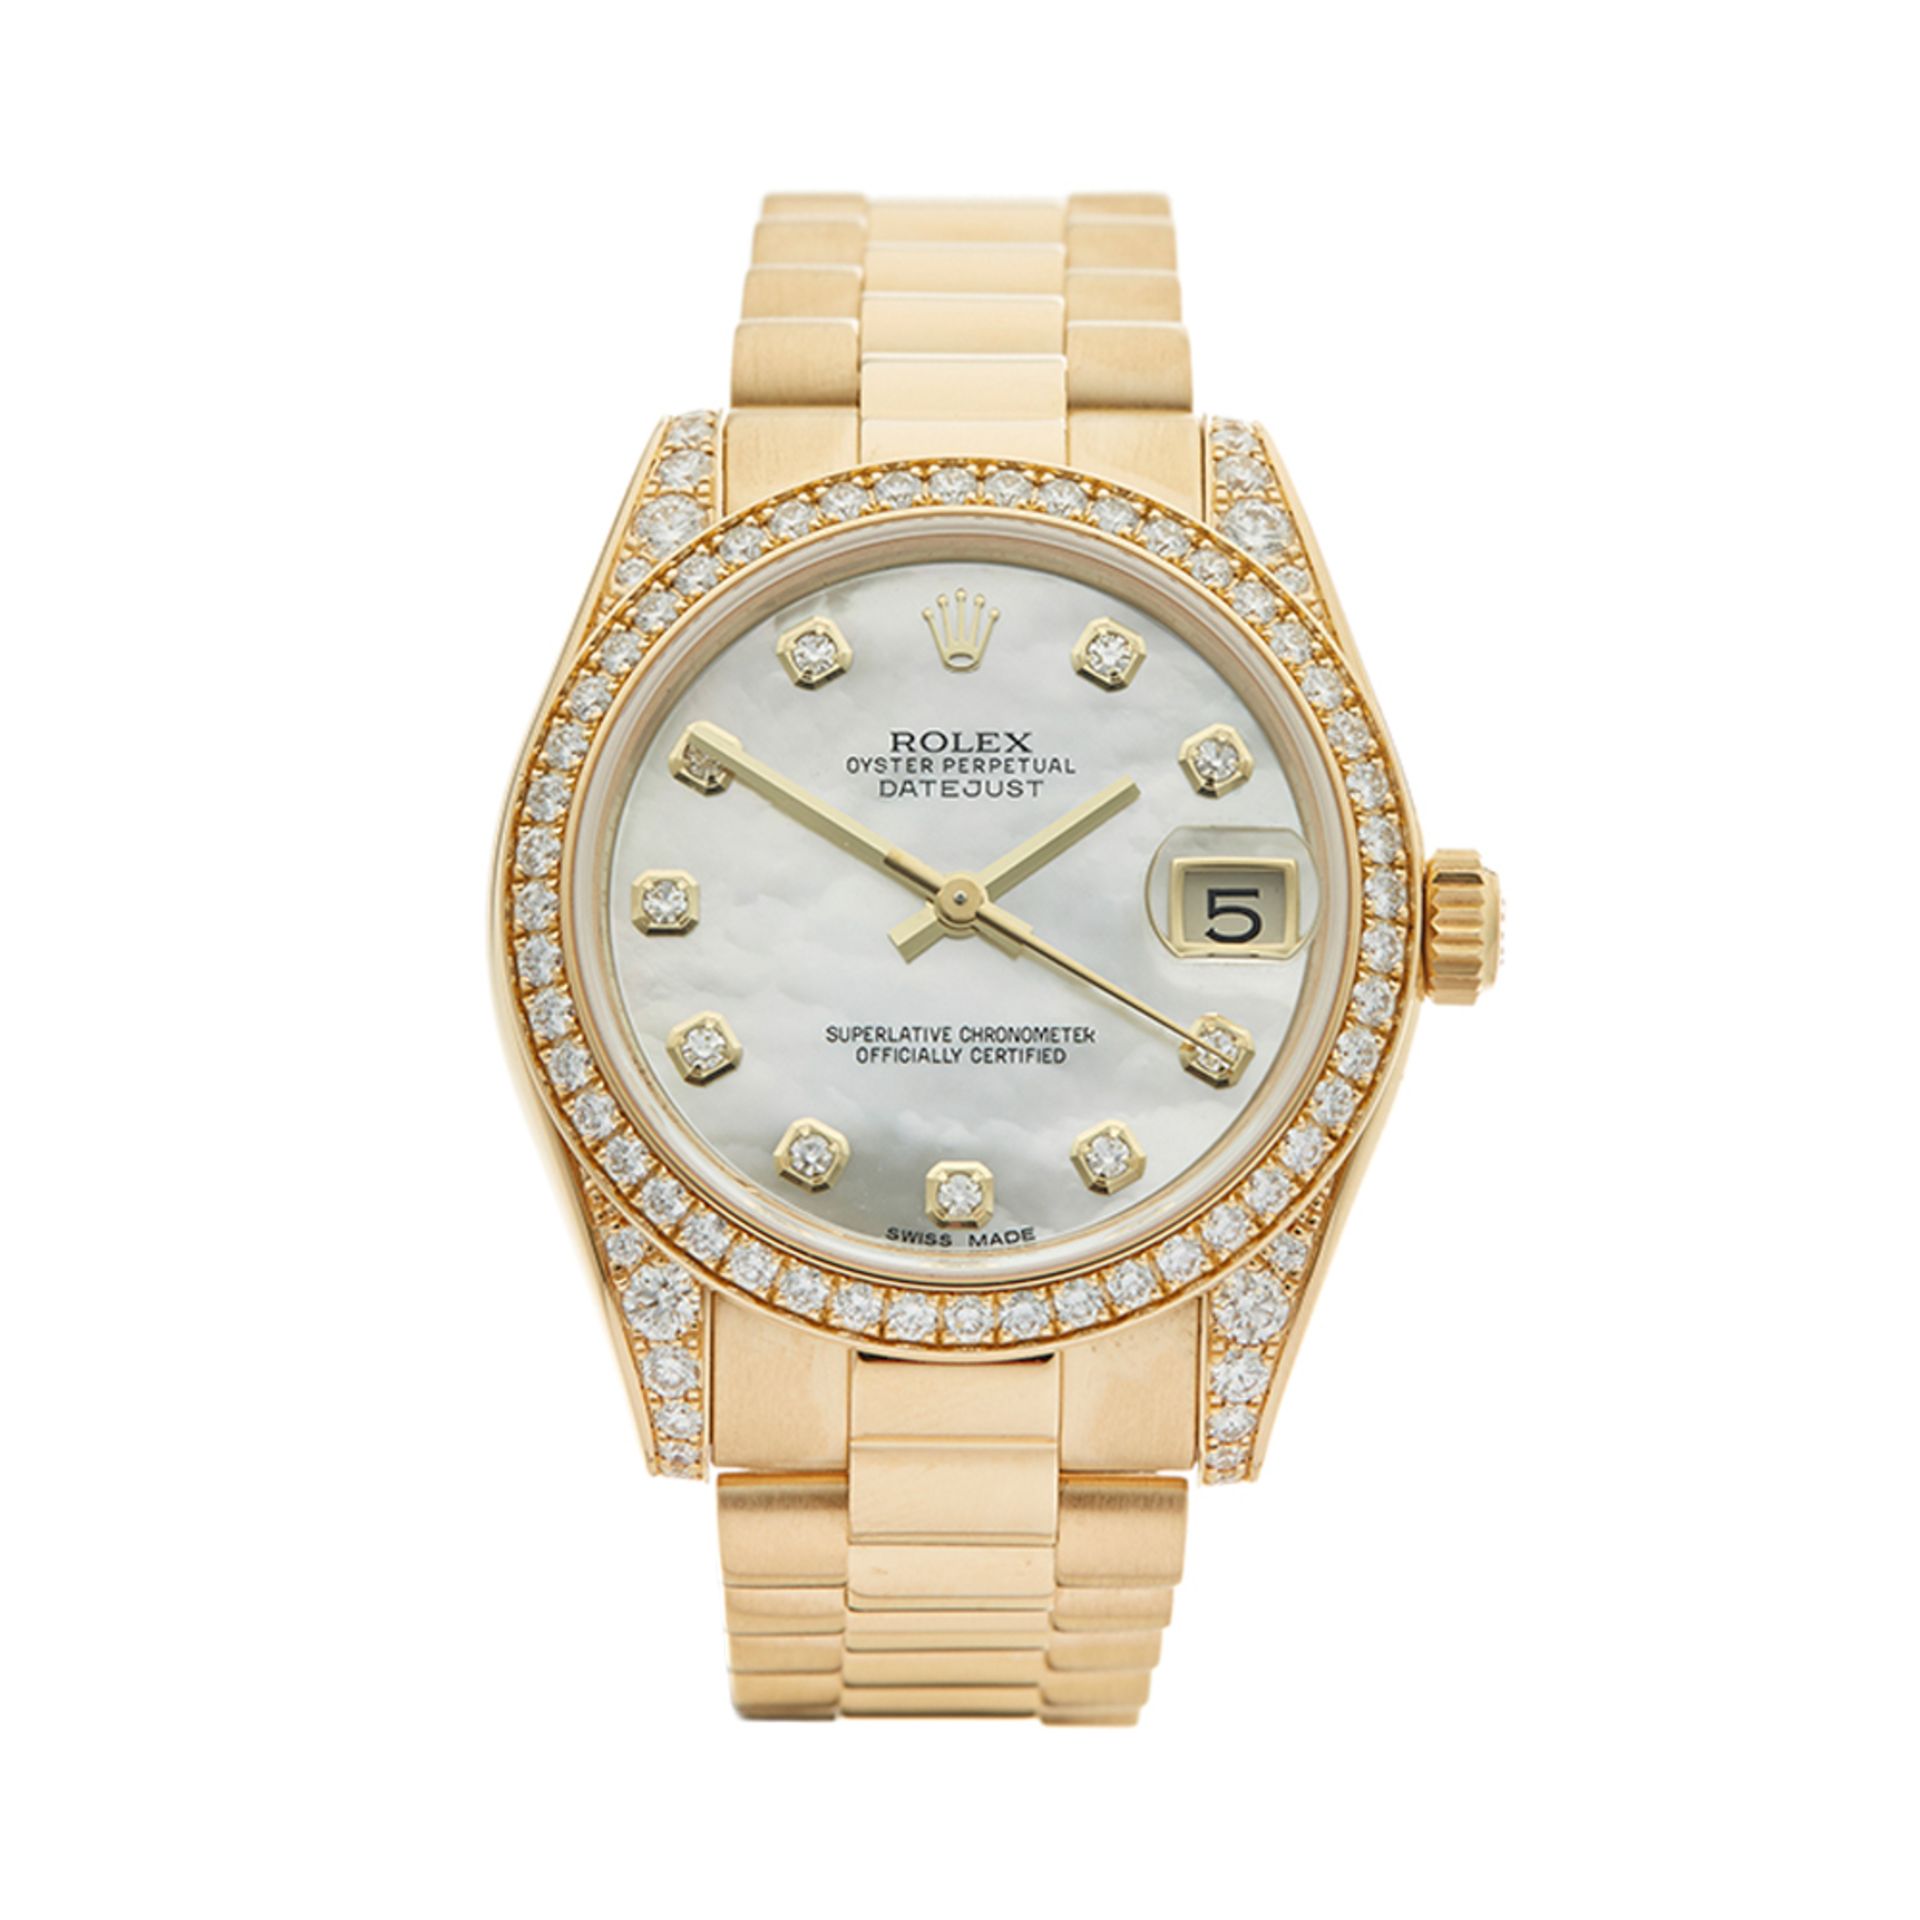 Datejust 31mm 18K Yellow Gold - 178158 - Image 2 of 8